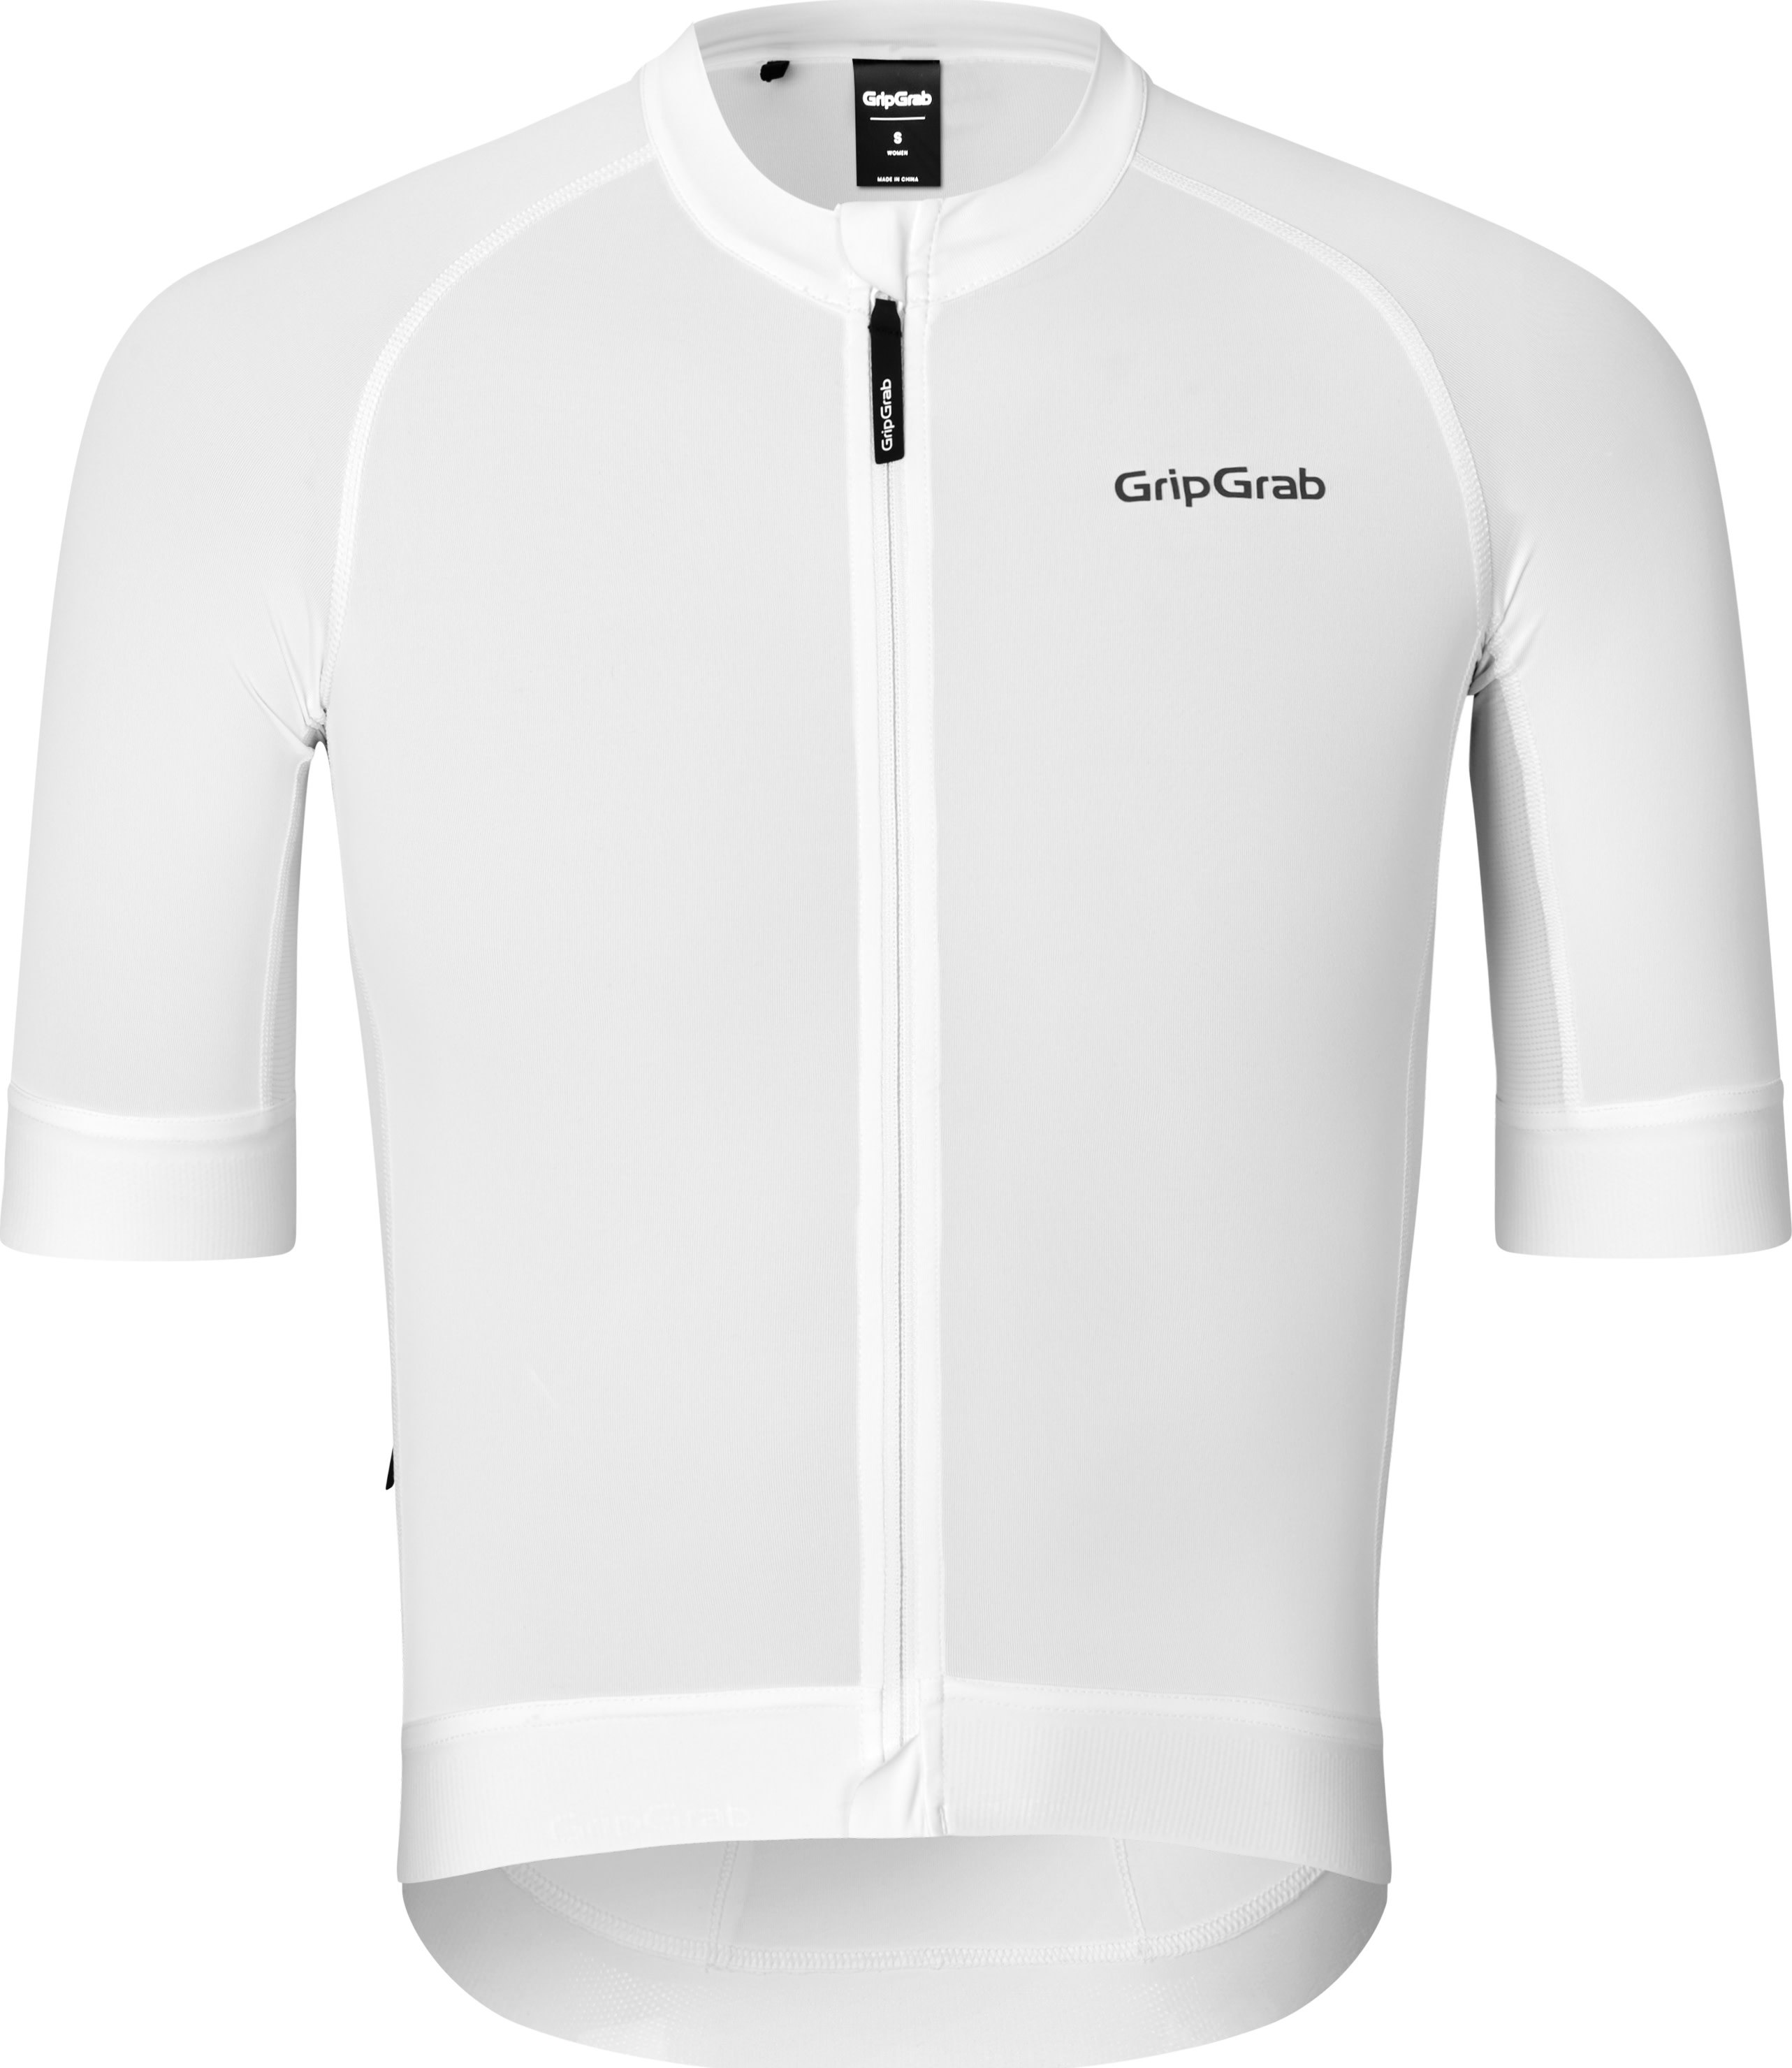 Gripgrab Men’s Pace Short Sleeve Jersey White